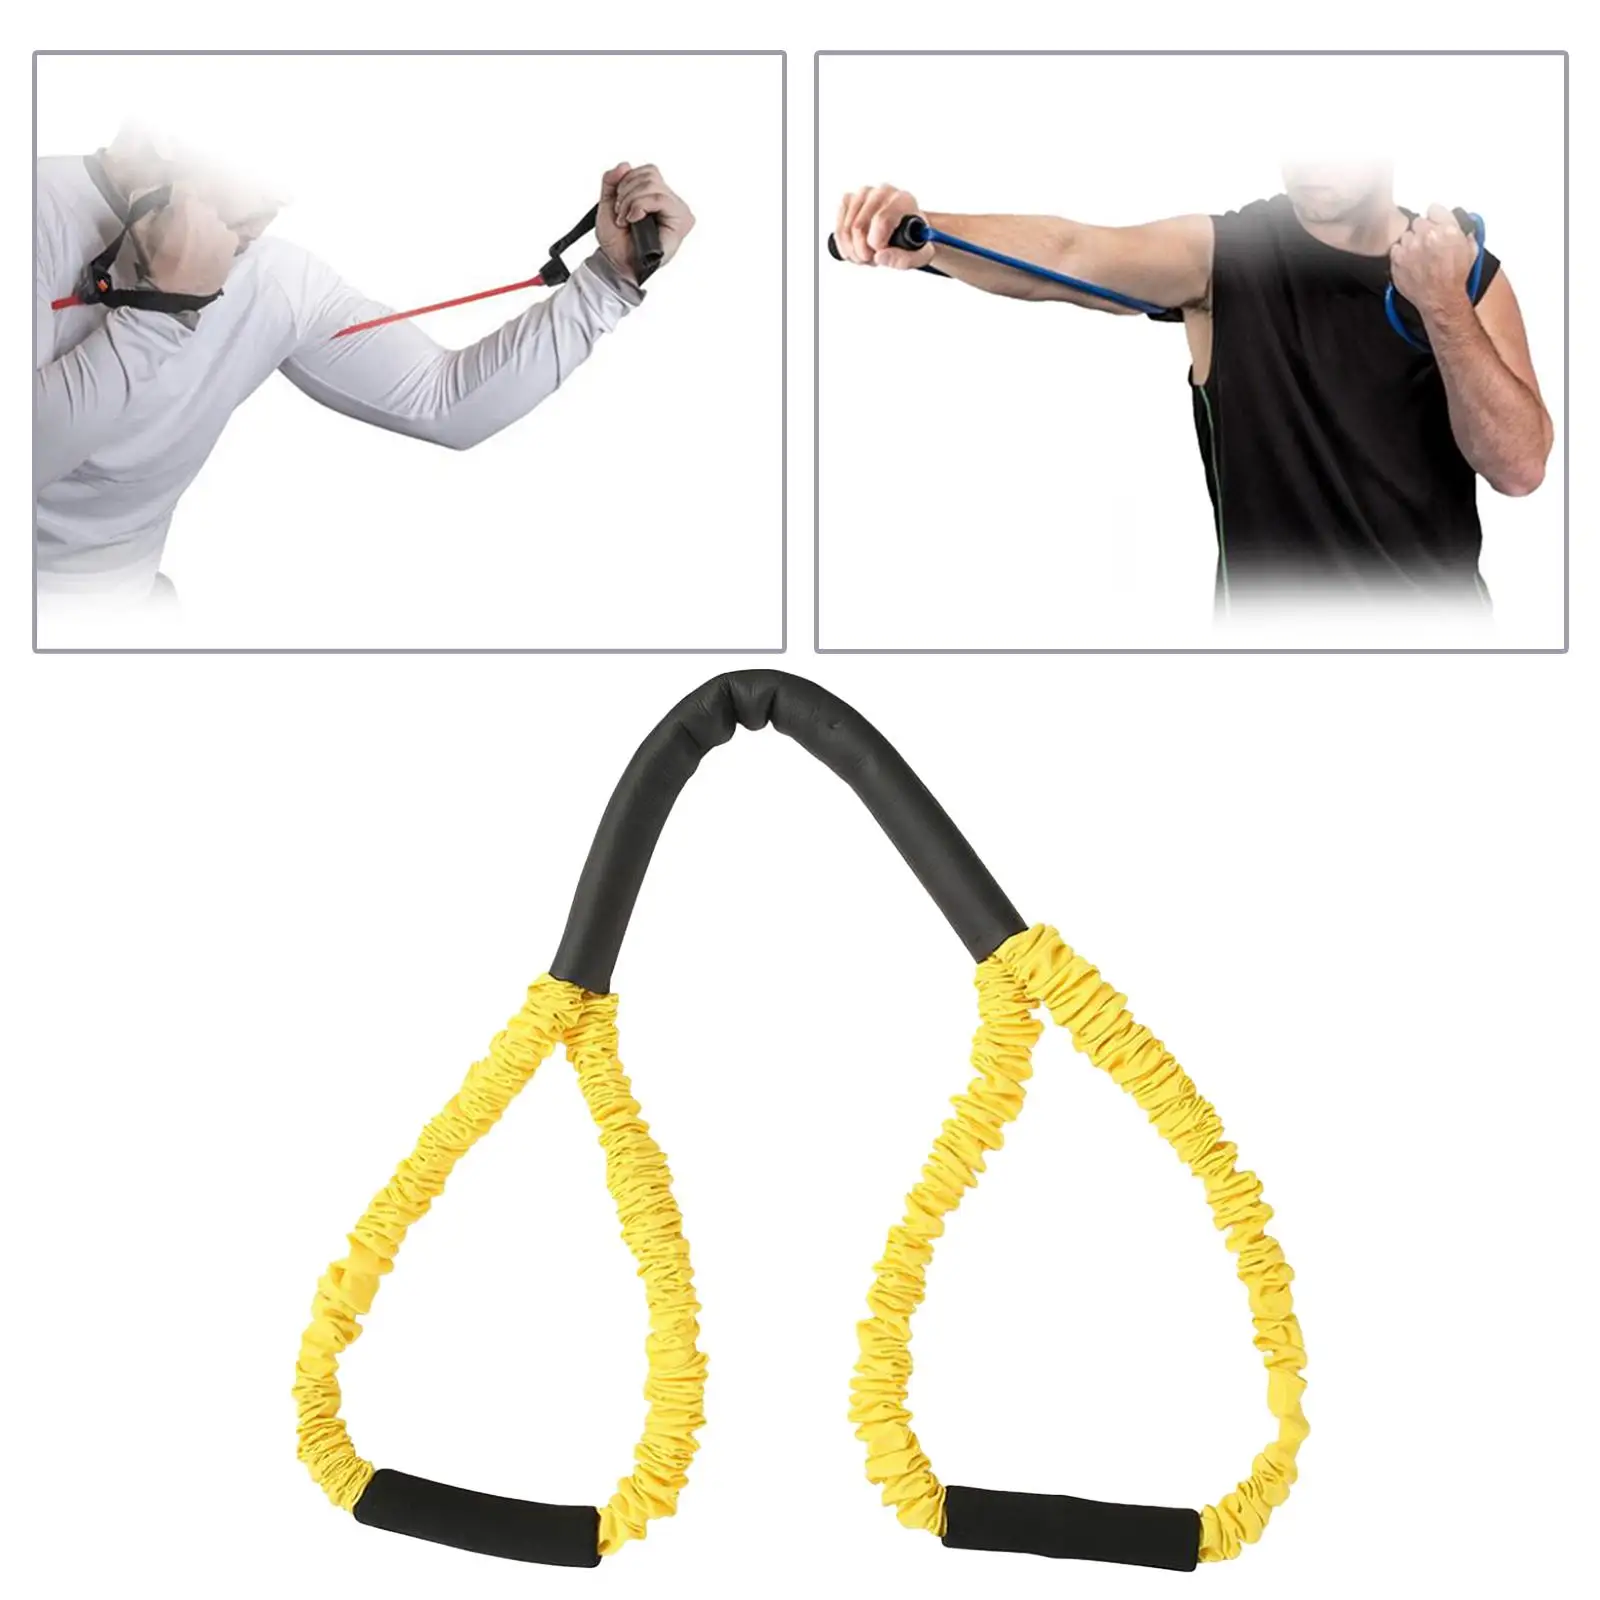 Boxing Resistance Bands Home Gym Workout Equipment Exercise Bands for Muscle Building Shadow Boxing Volleyball Football Legs Arm